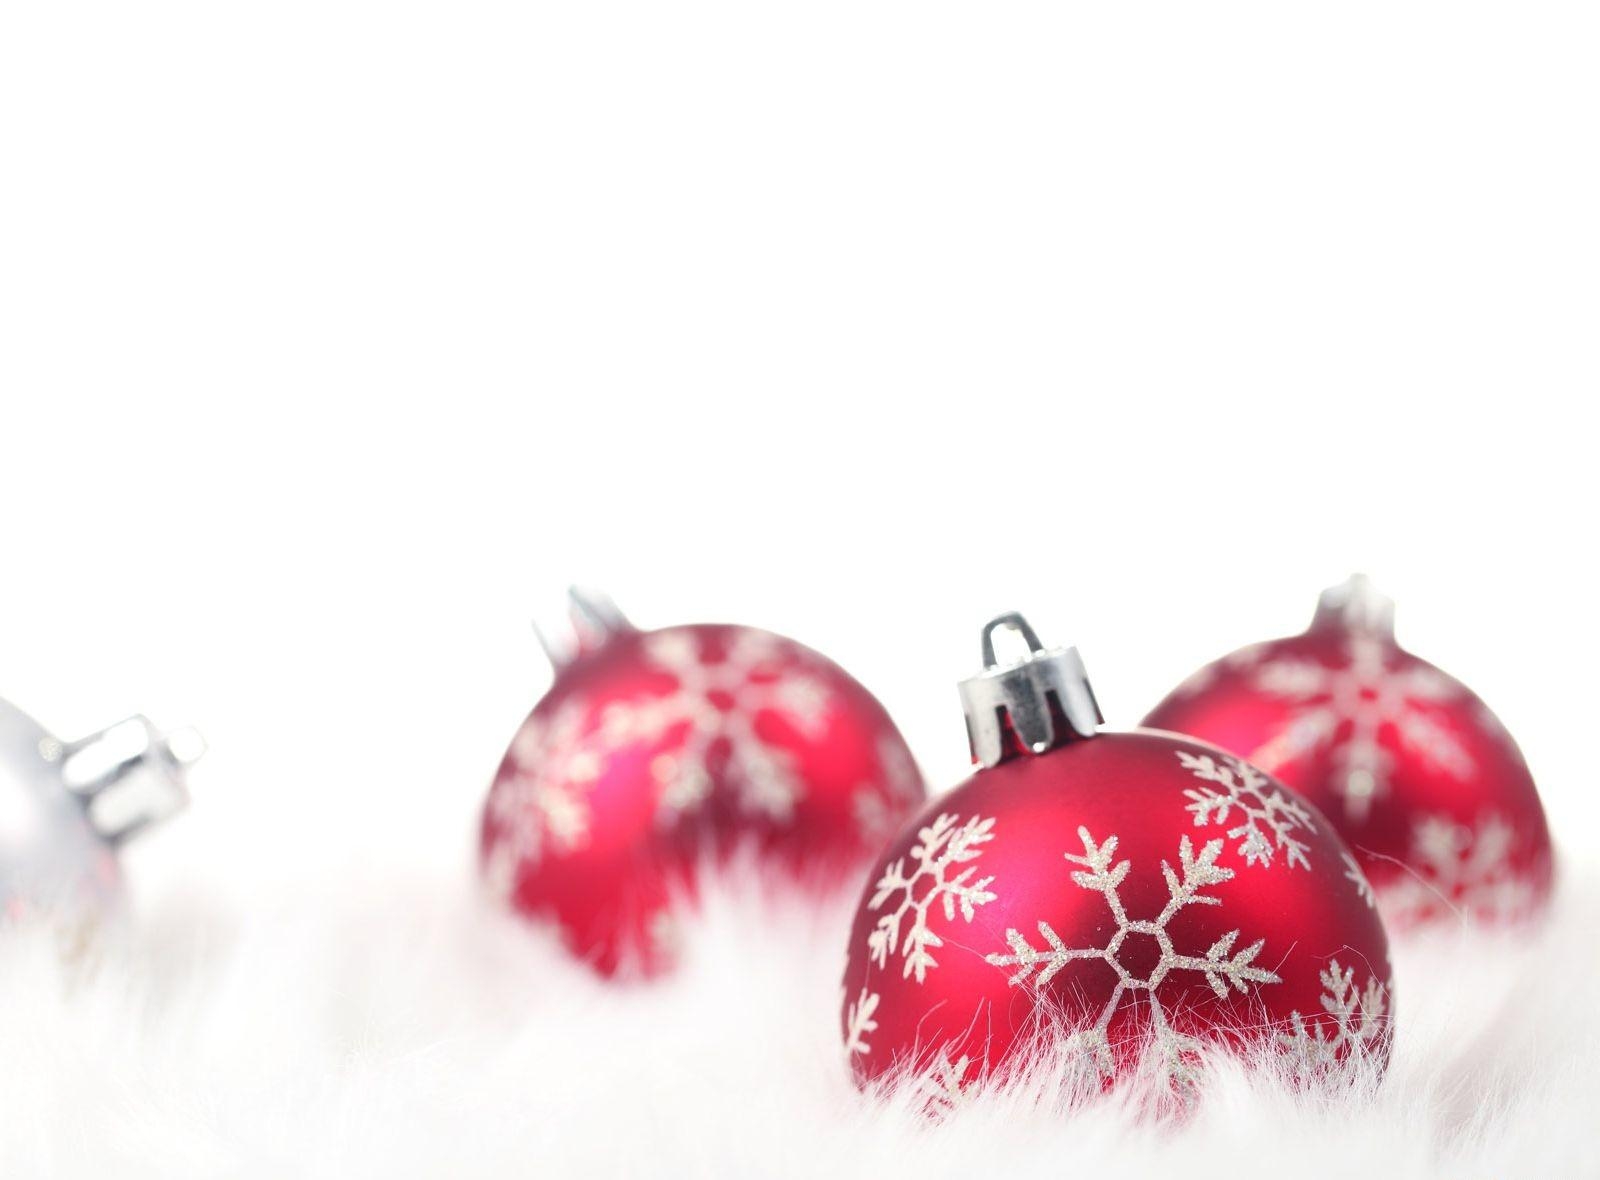 91355 download wallpaper christmas decorations, holidays, decorations, patterns, christmas tree toys, balls, fluff, fuzz screensavers and pictures for free